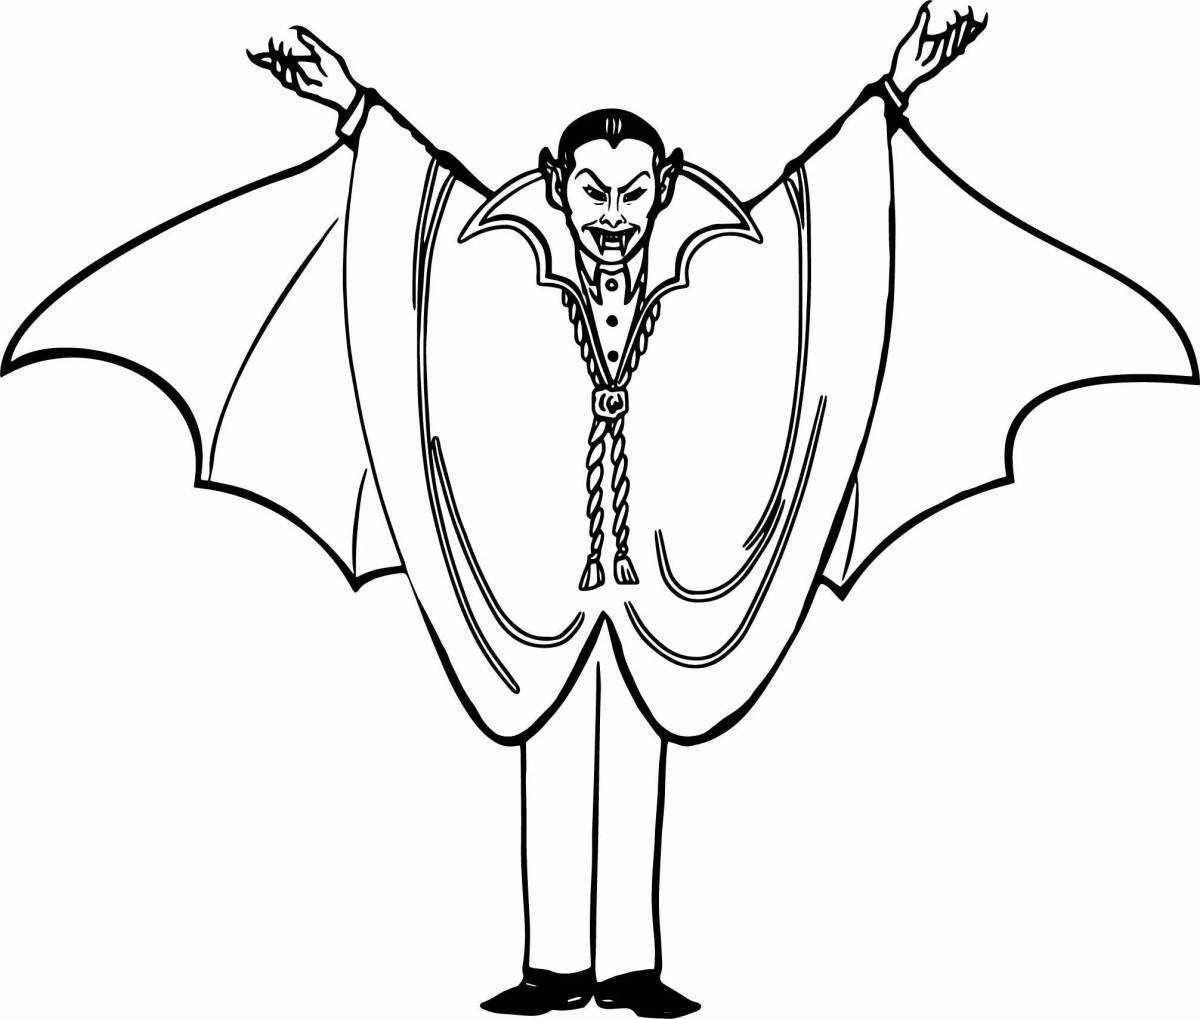 Sinful vampire coloring page